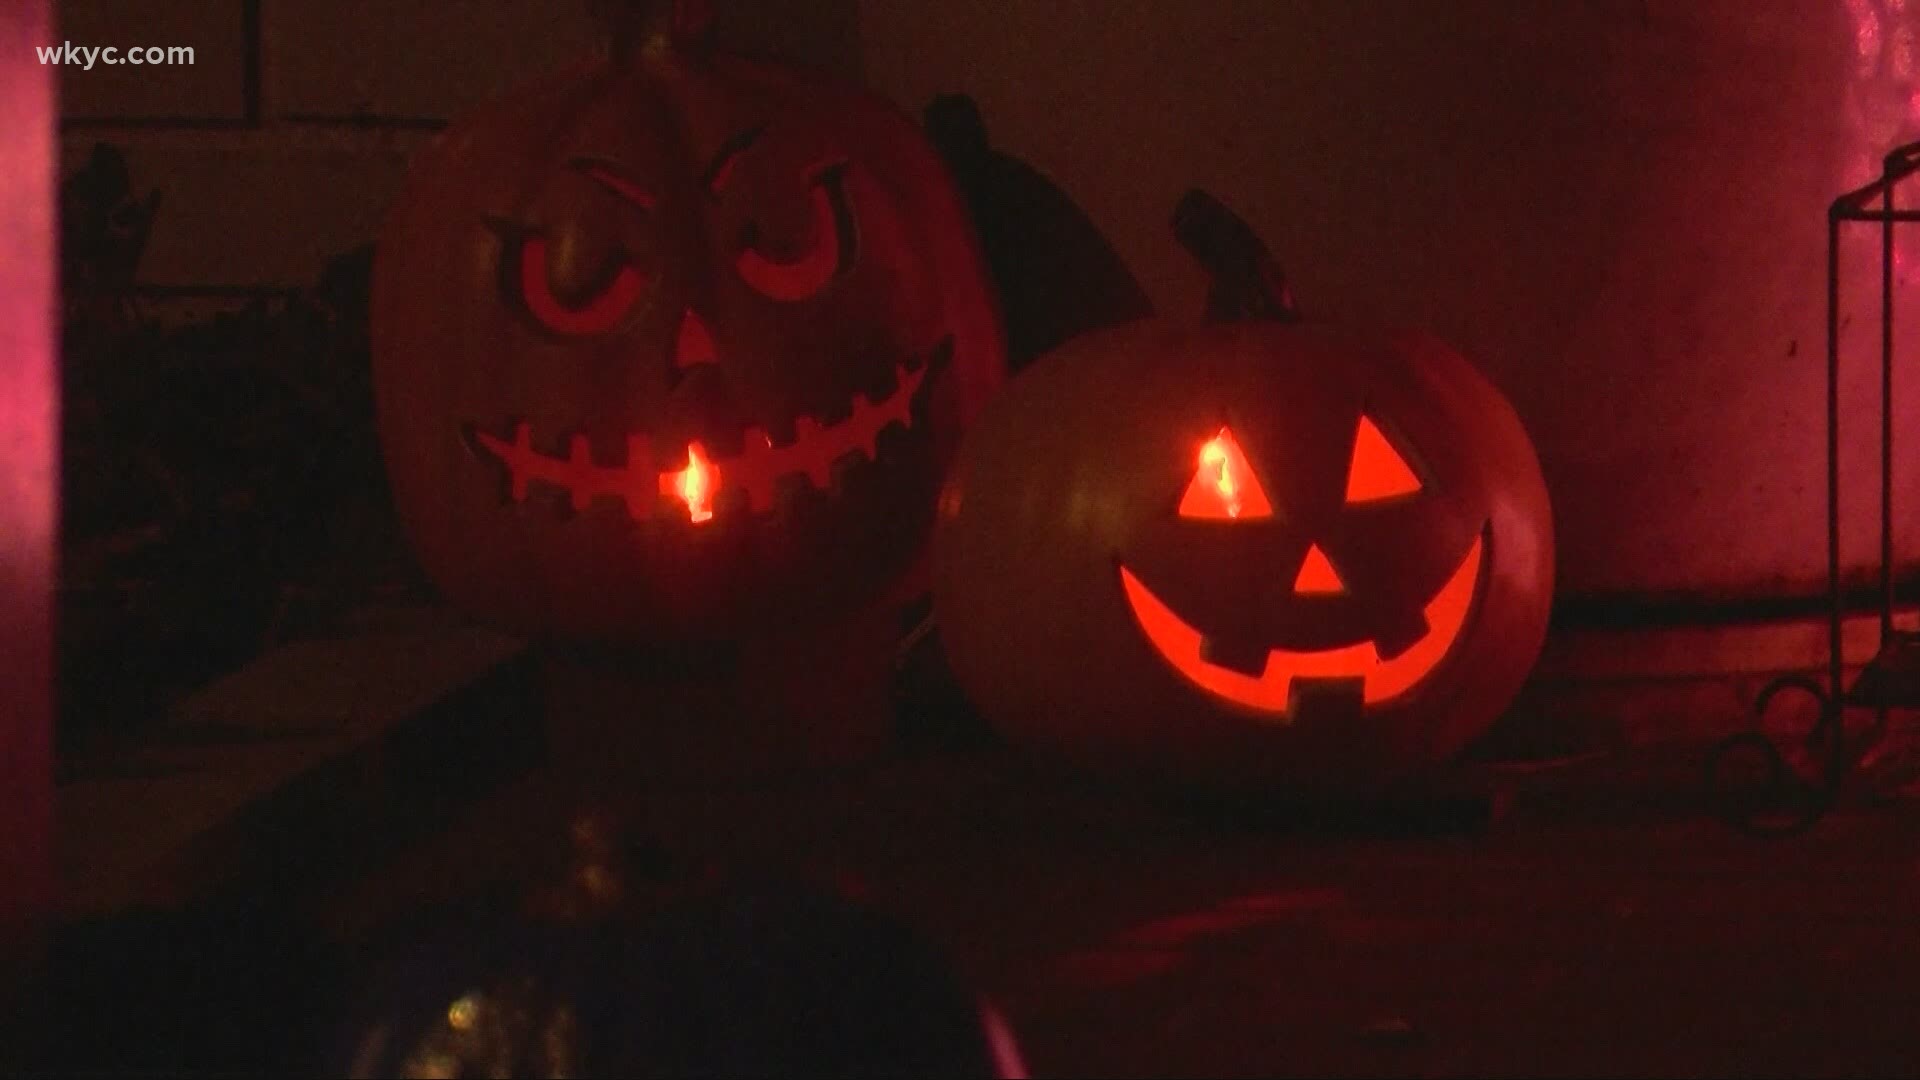 The state is not canceling trick-or-treating, but health officials released a list of Halloween safety precautions. Amani Abraham reports.